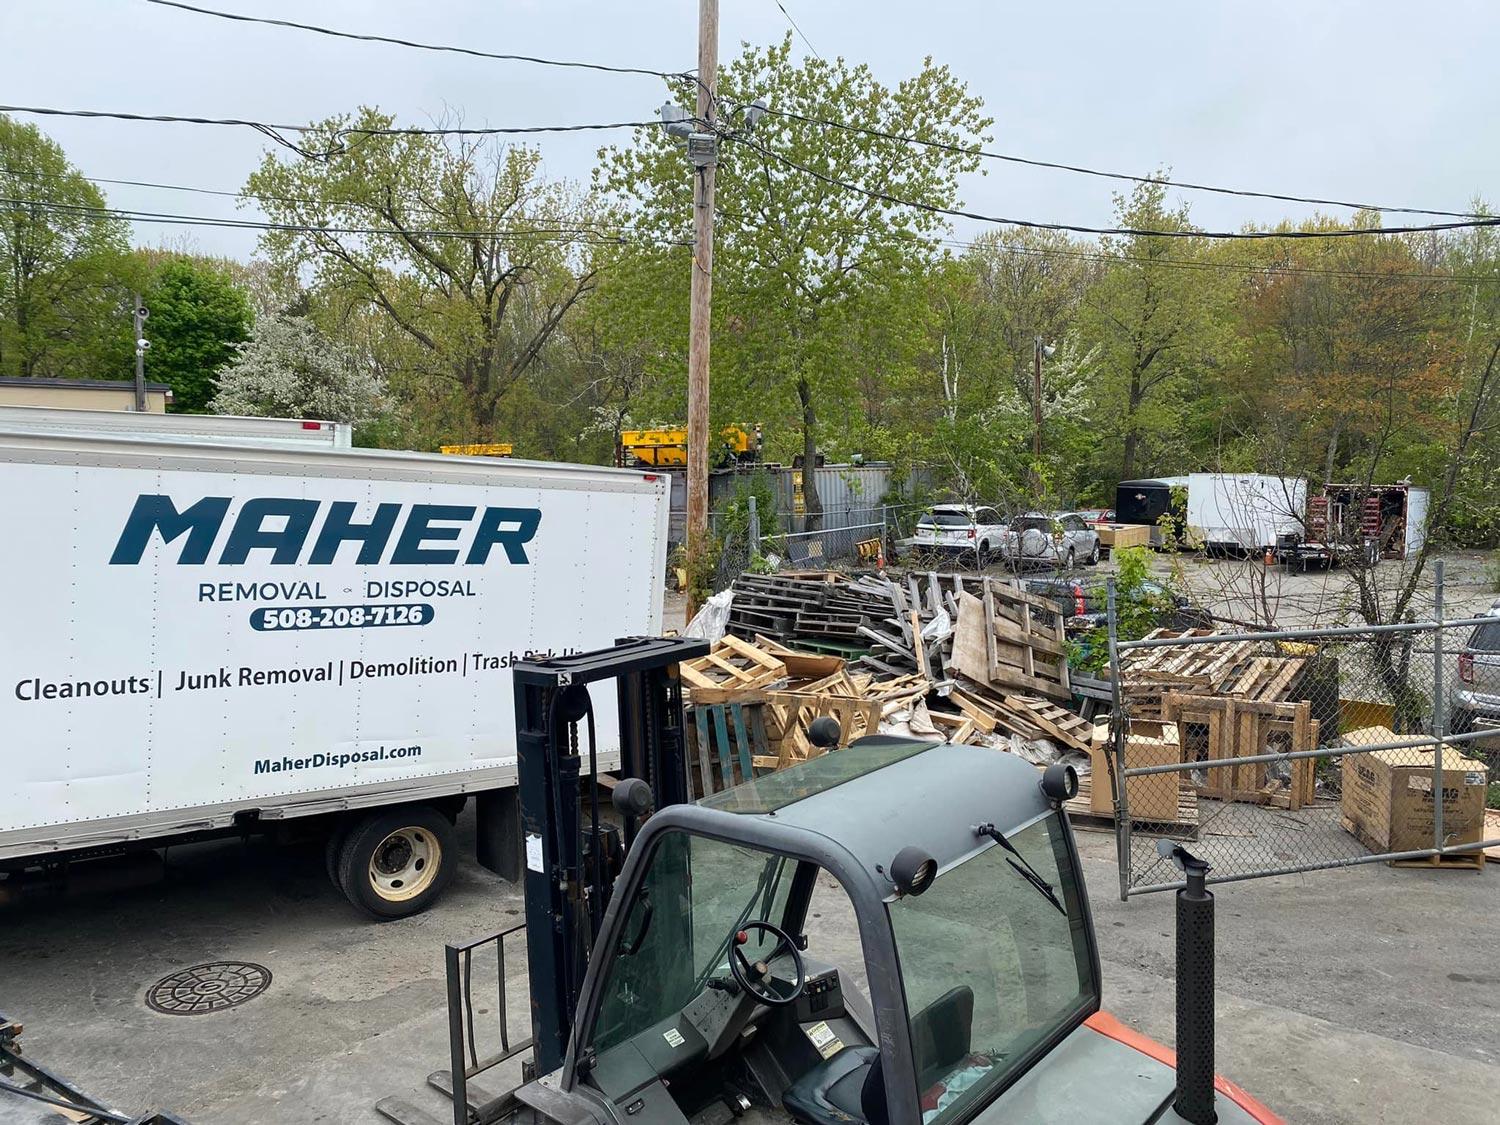 Maher Removal & Disposal offers bulk junk removal services for commercial property cleanouts.